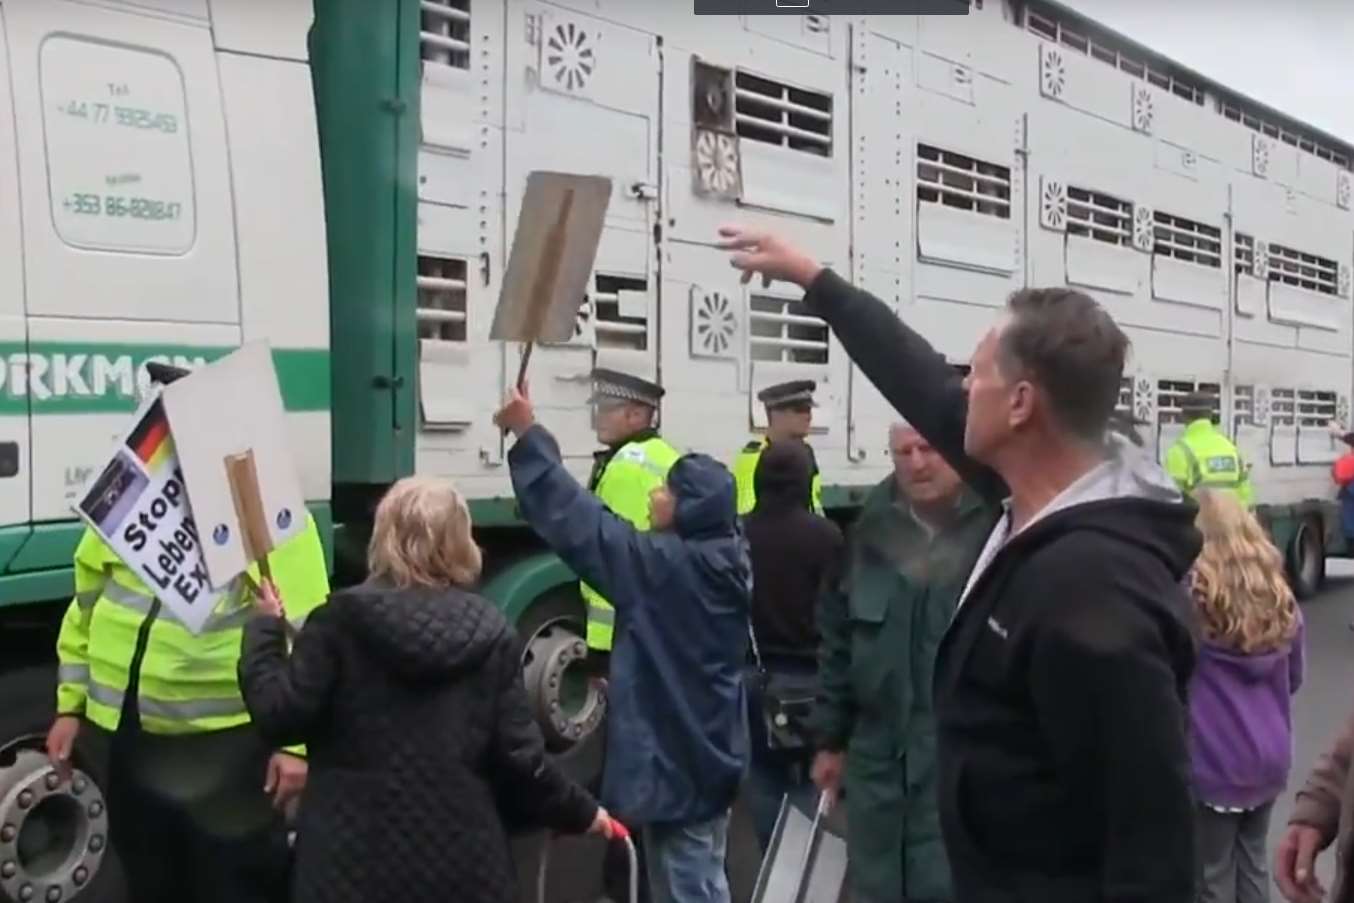 About 40 people were protesting at Ramsgate Port today about live animal exports